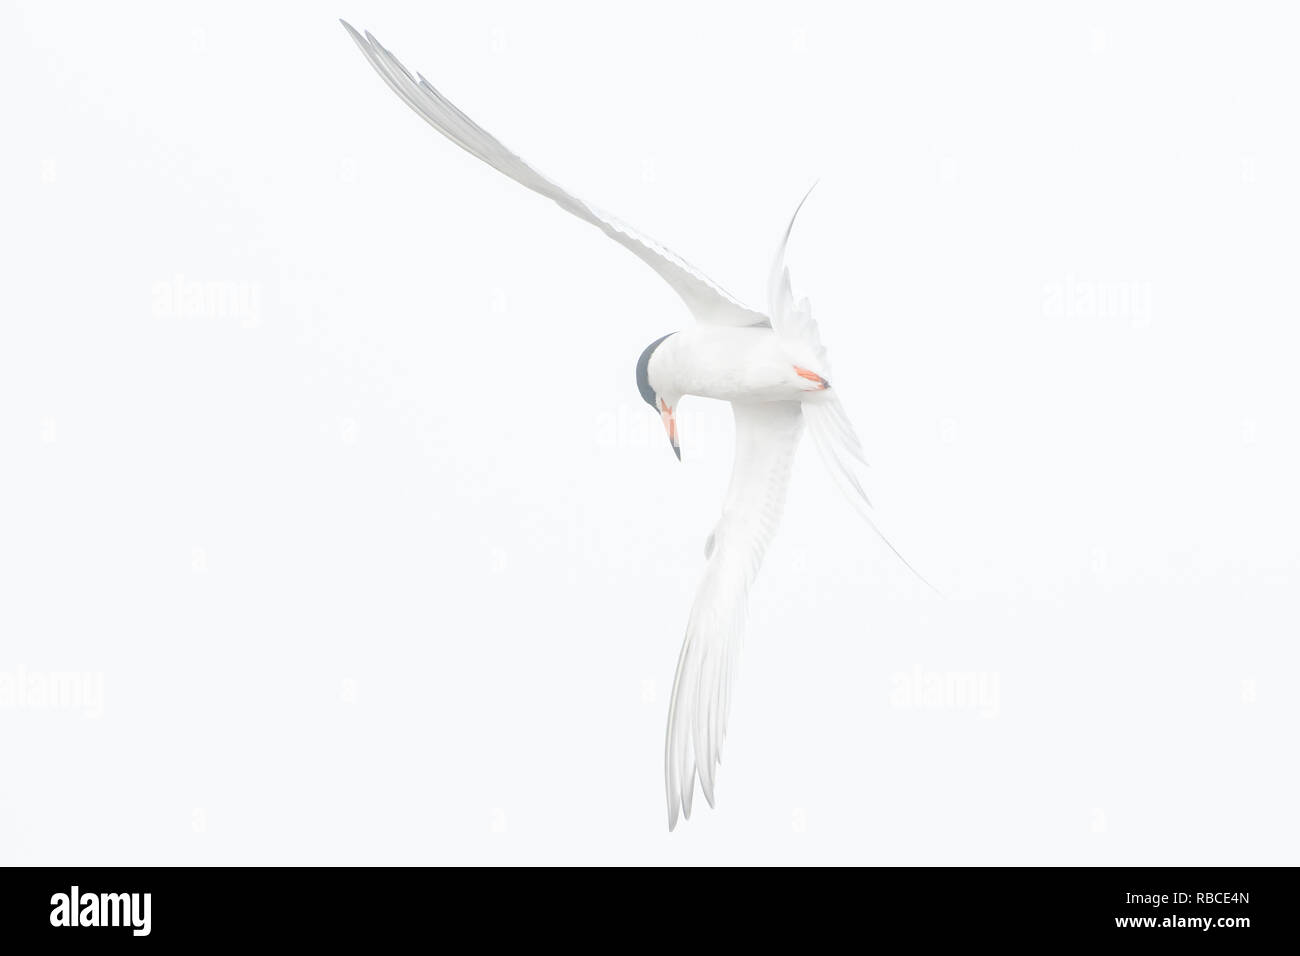 Foster's tern foraging flight on an early foggy morning Stock Photo